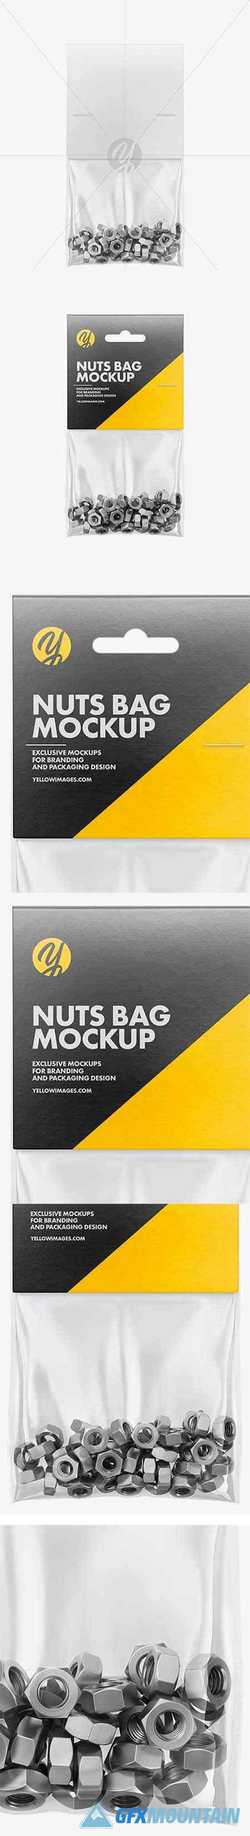 Plastic Bag With Nuts Mockup 